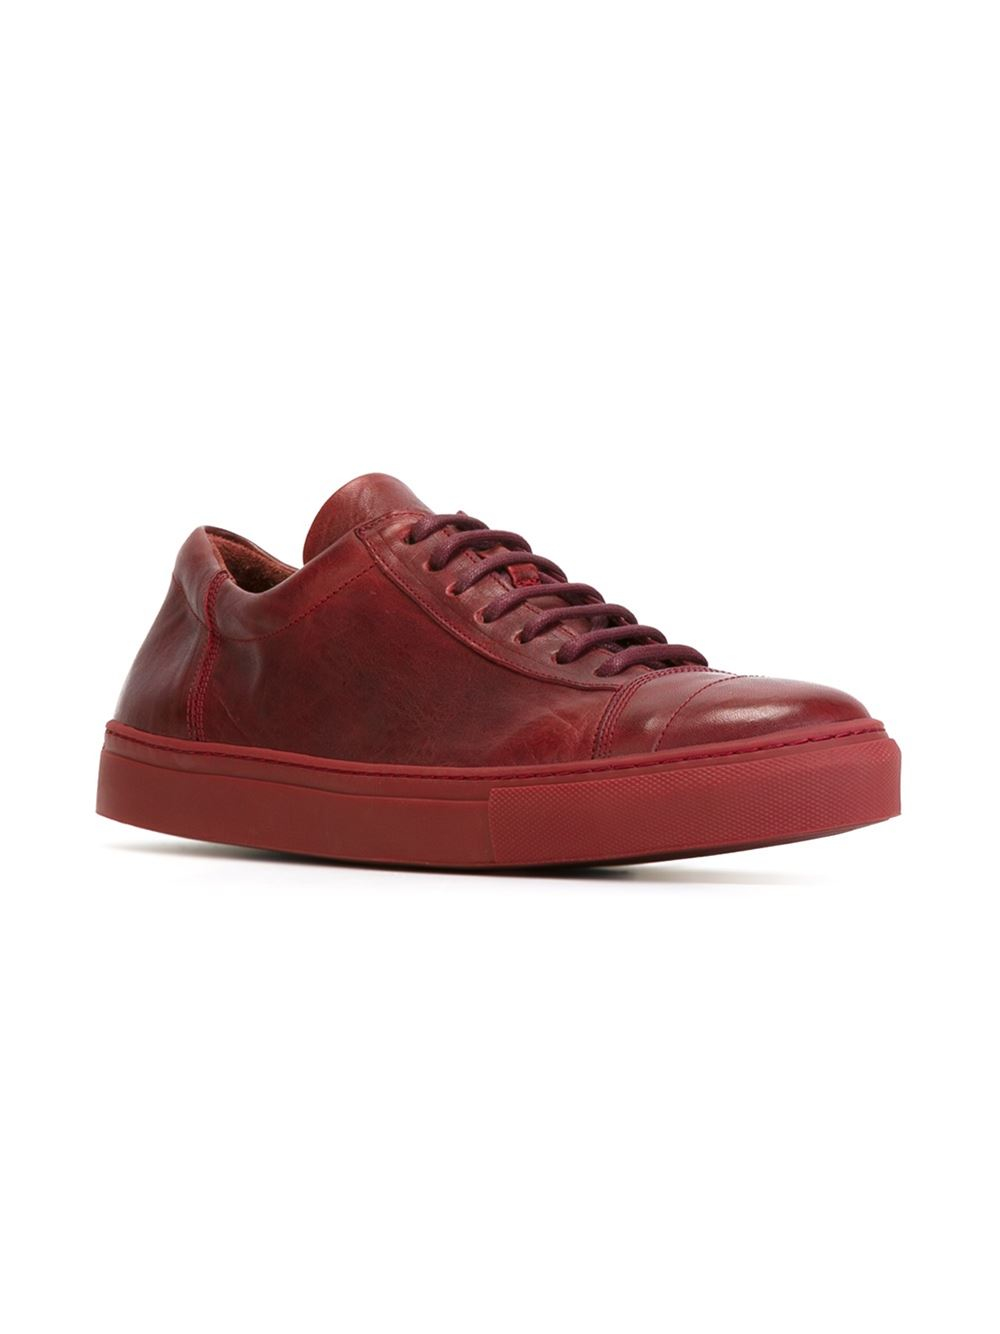 Lyst - The last conspiracy 'edgar' Sneakers in Red for Men